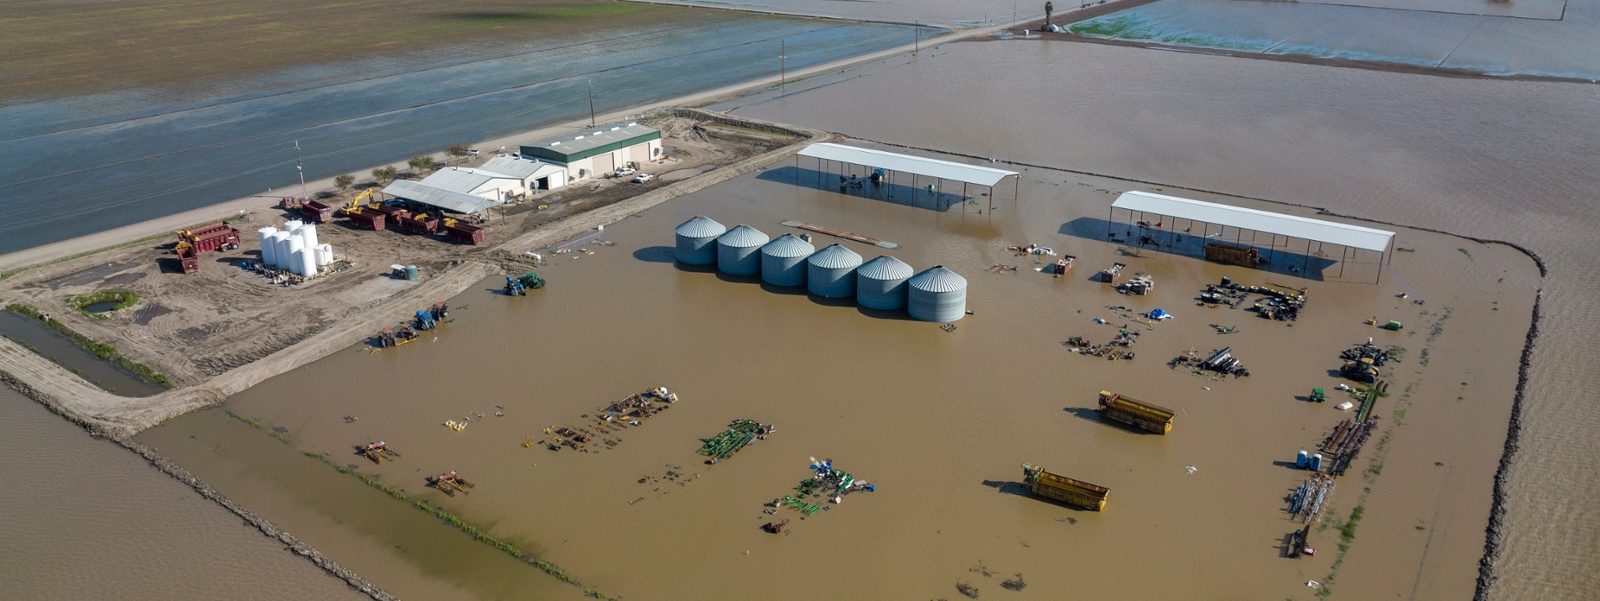 Farmers need 'direct relief' for storms, lawmakers told